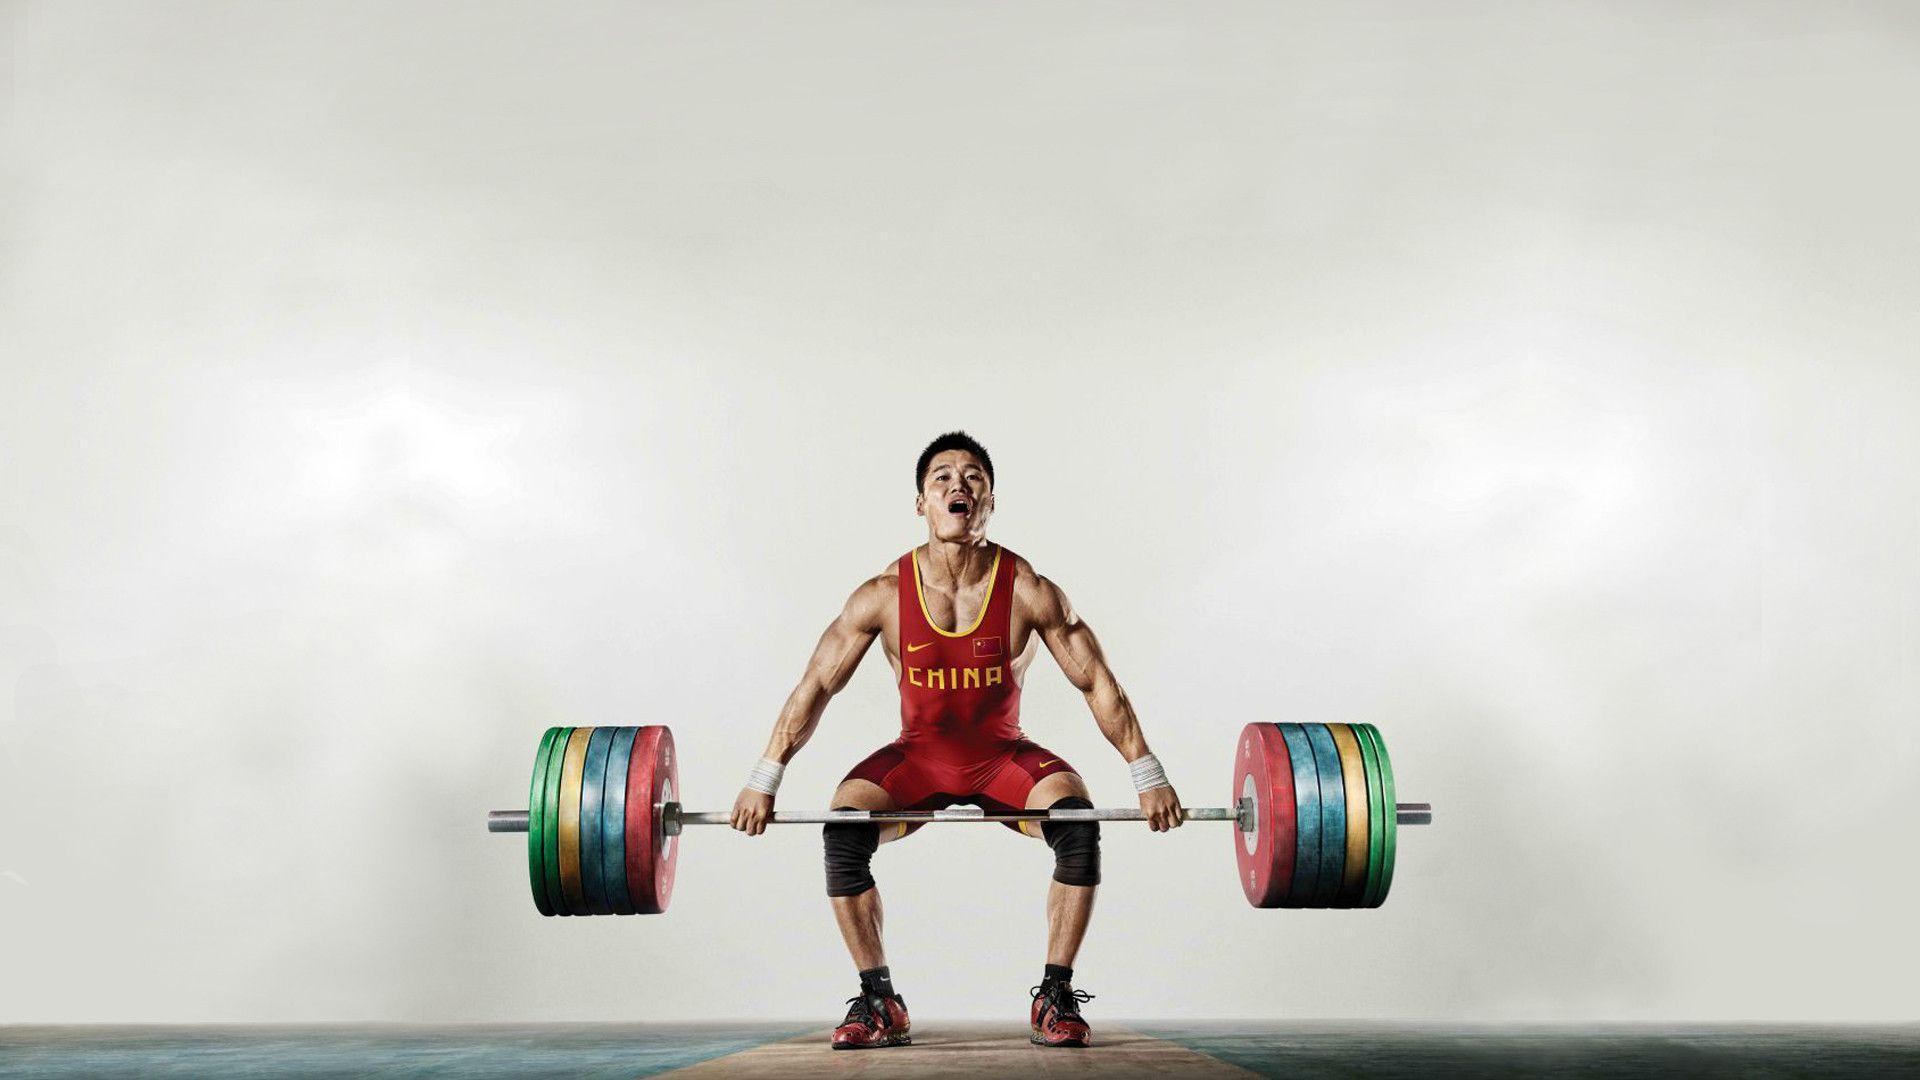 Wallpaper For > Olympic Weight Lifting Wallpaper